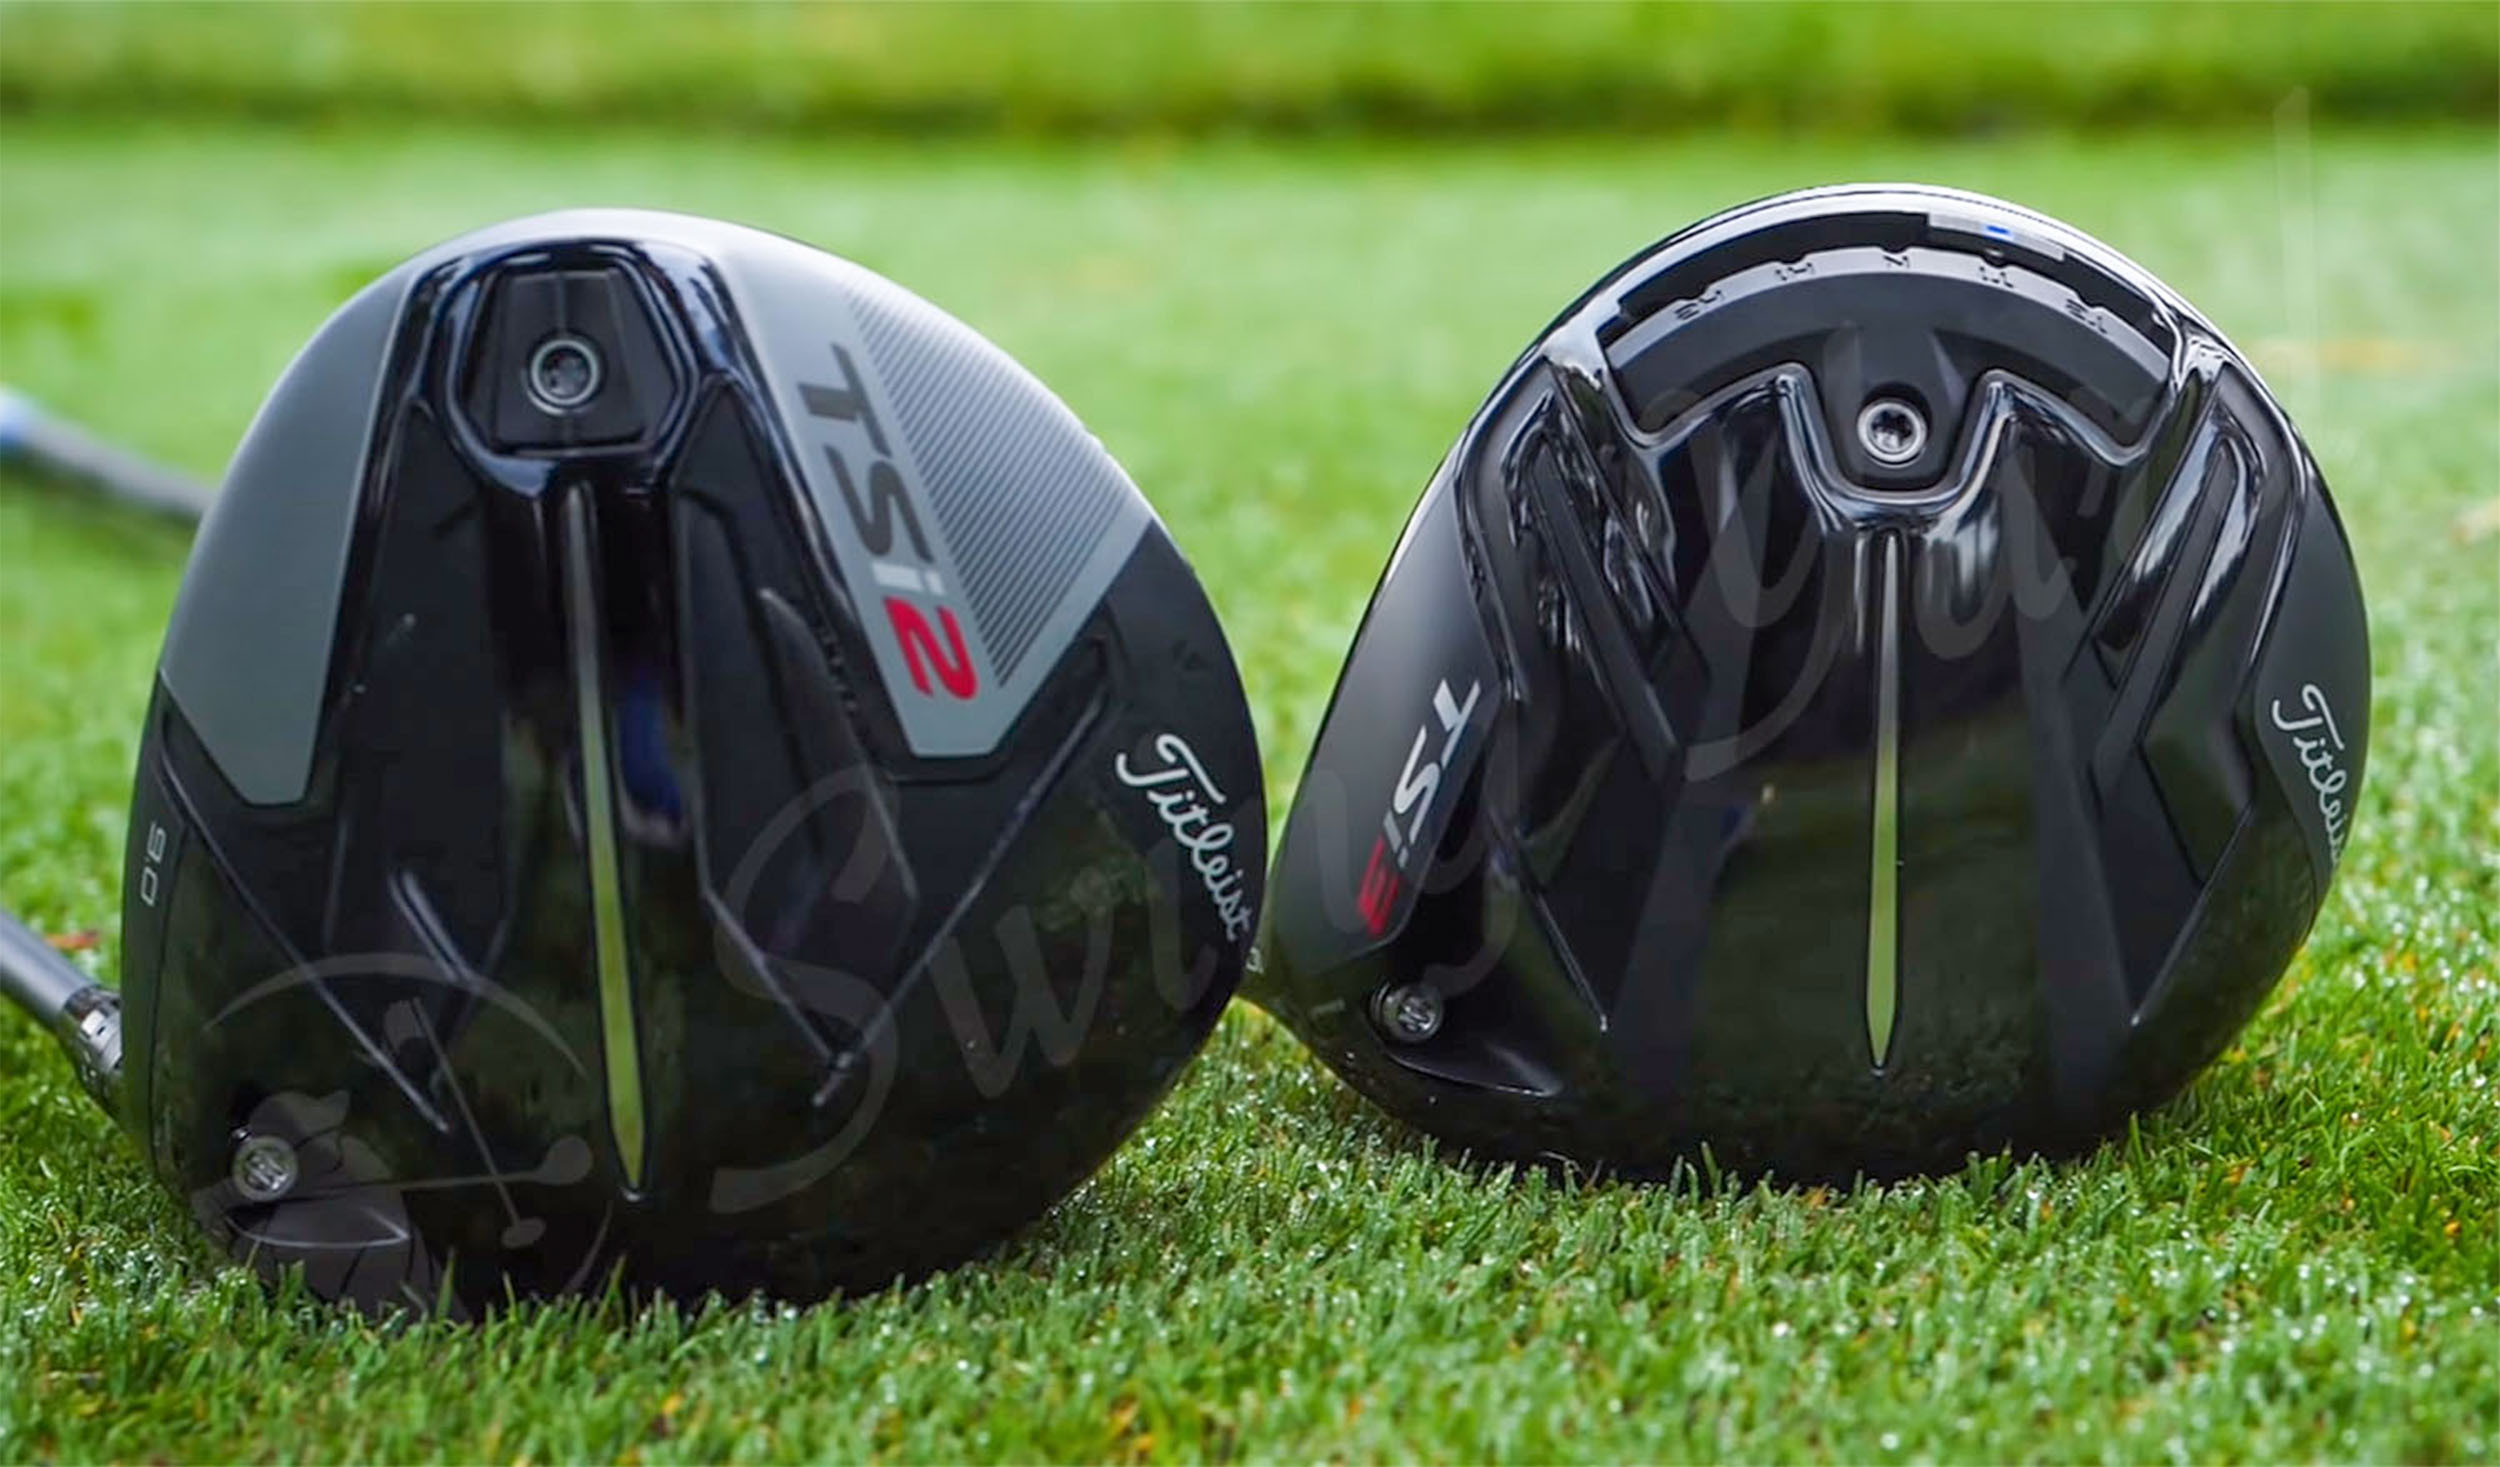 The Titleist TSi2 & TSi3 drivers in the grass at the golf course